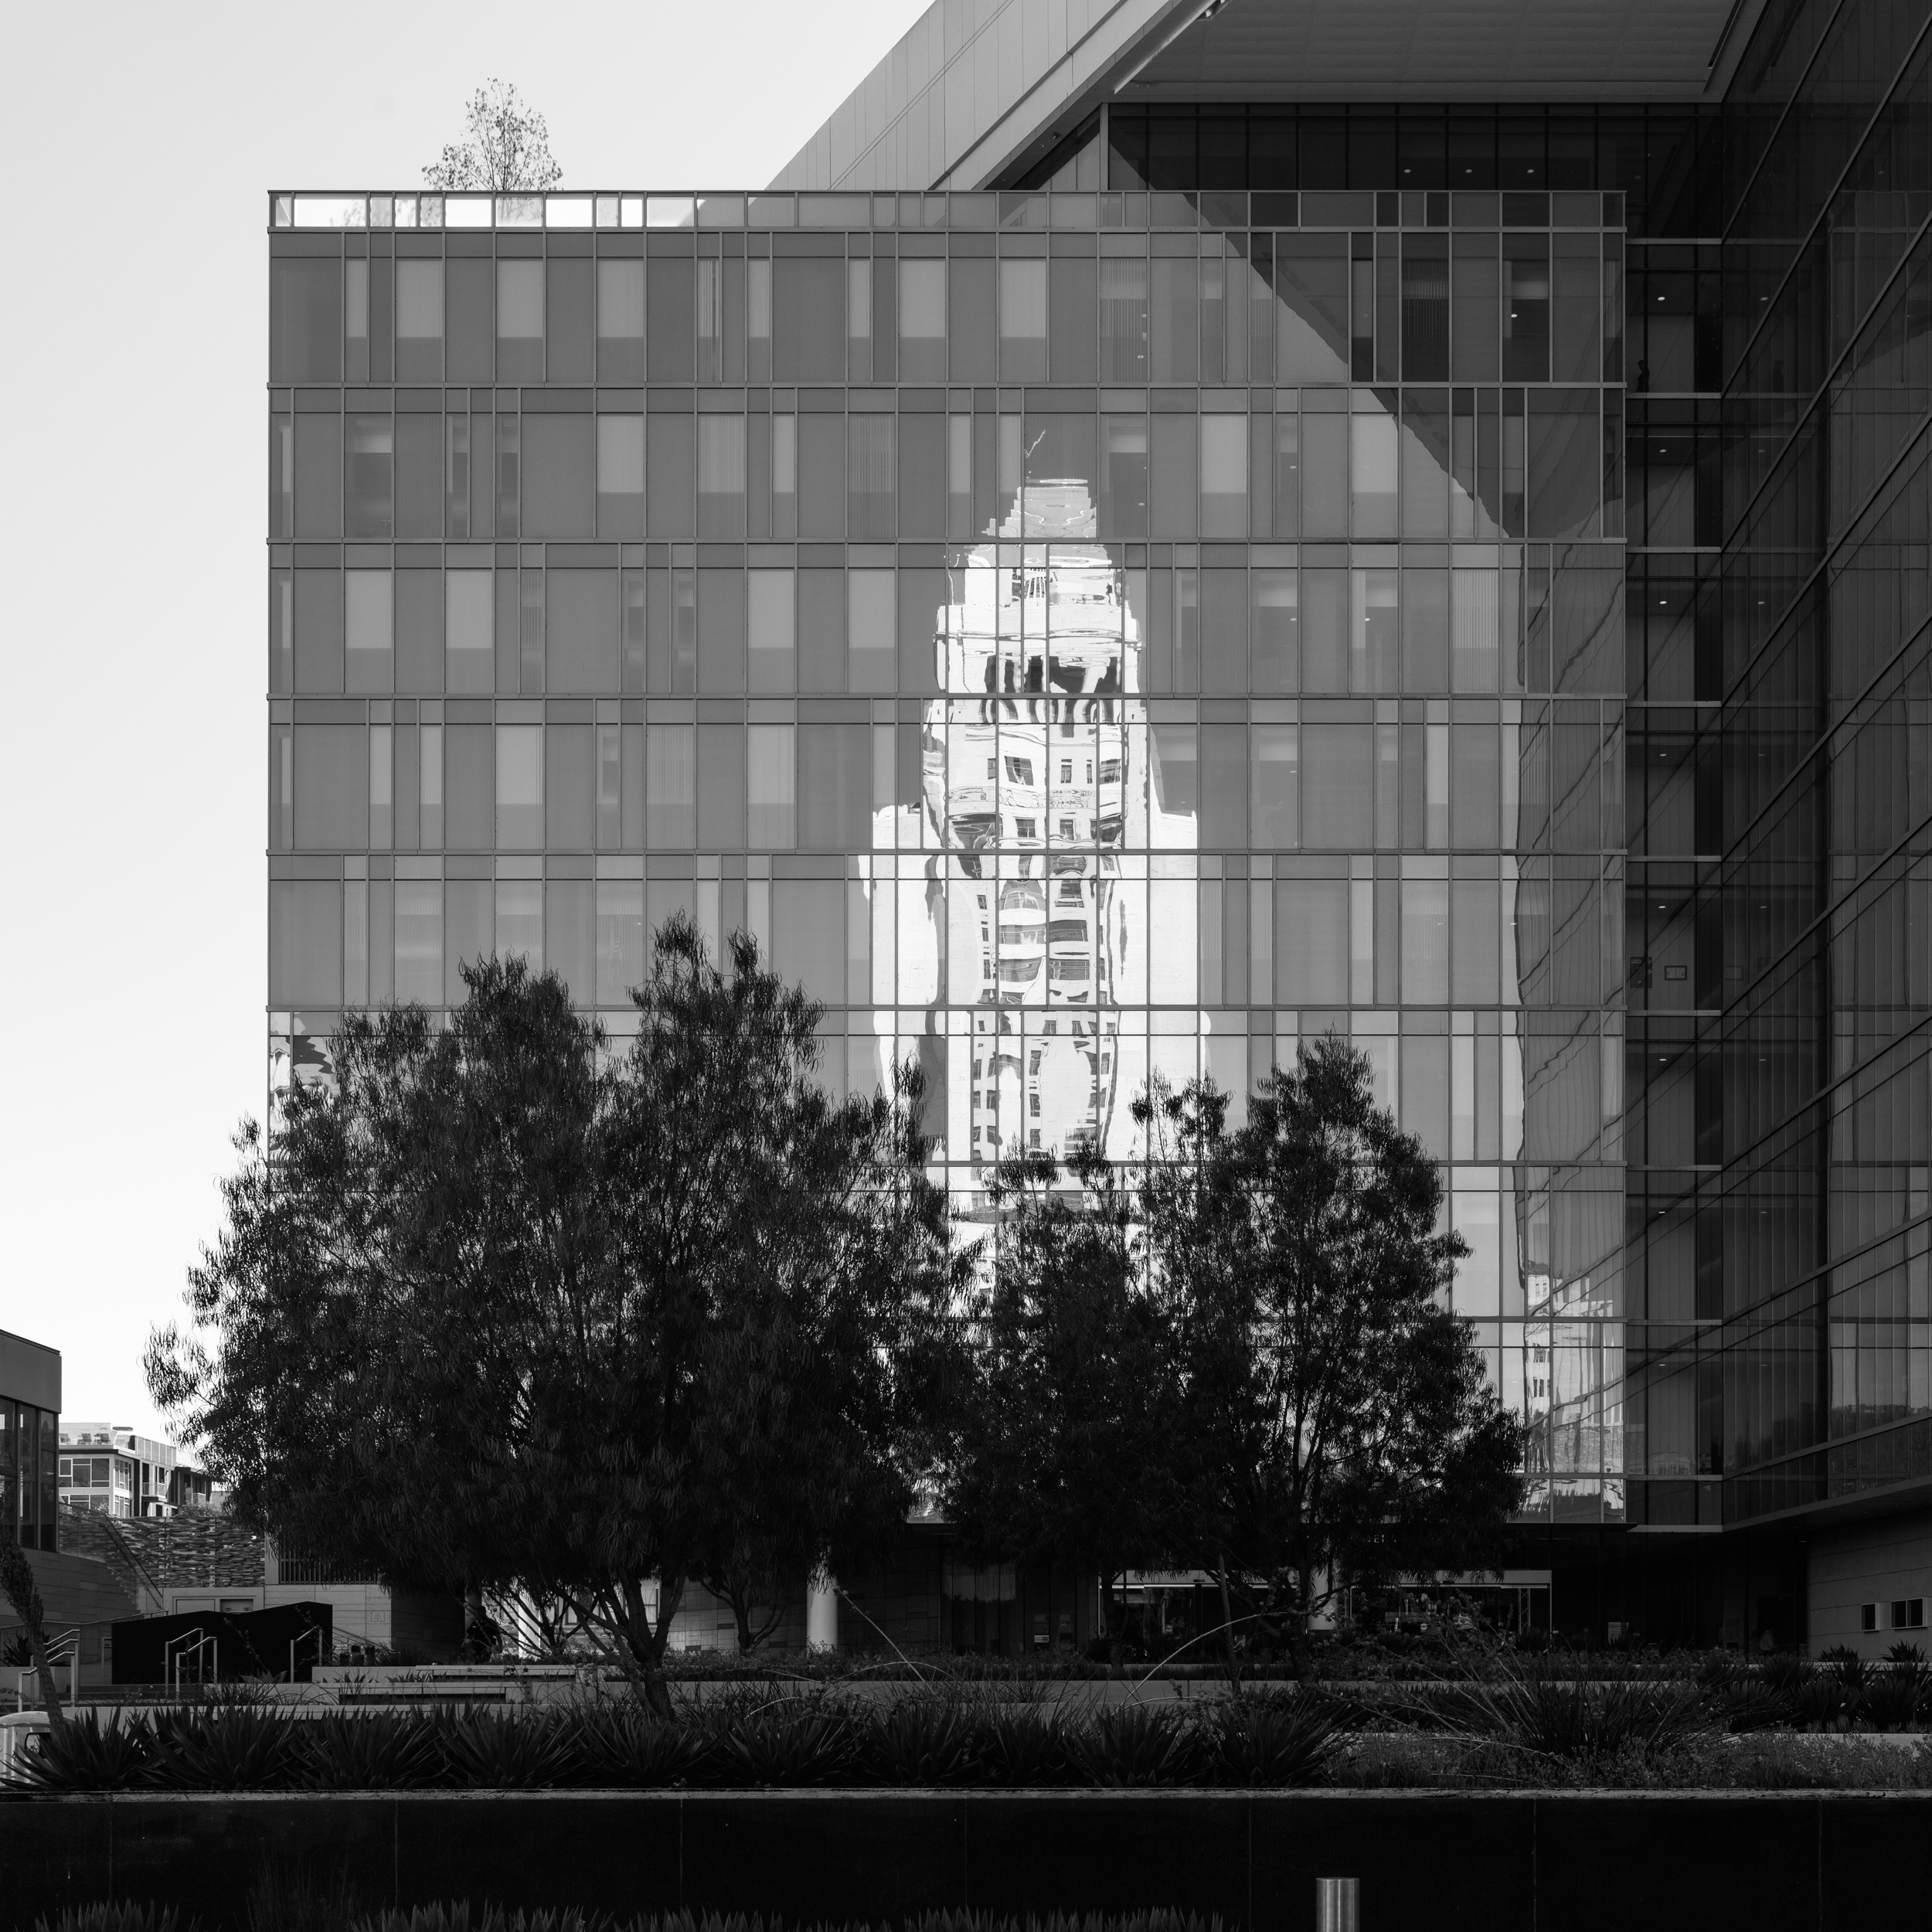 LOS ANGELES CITY HALL REFLECTIONS